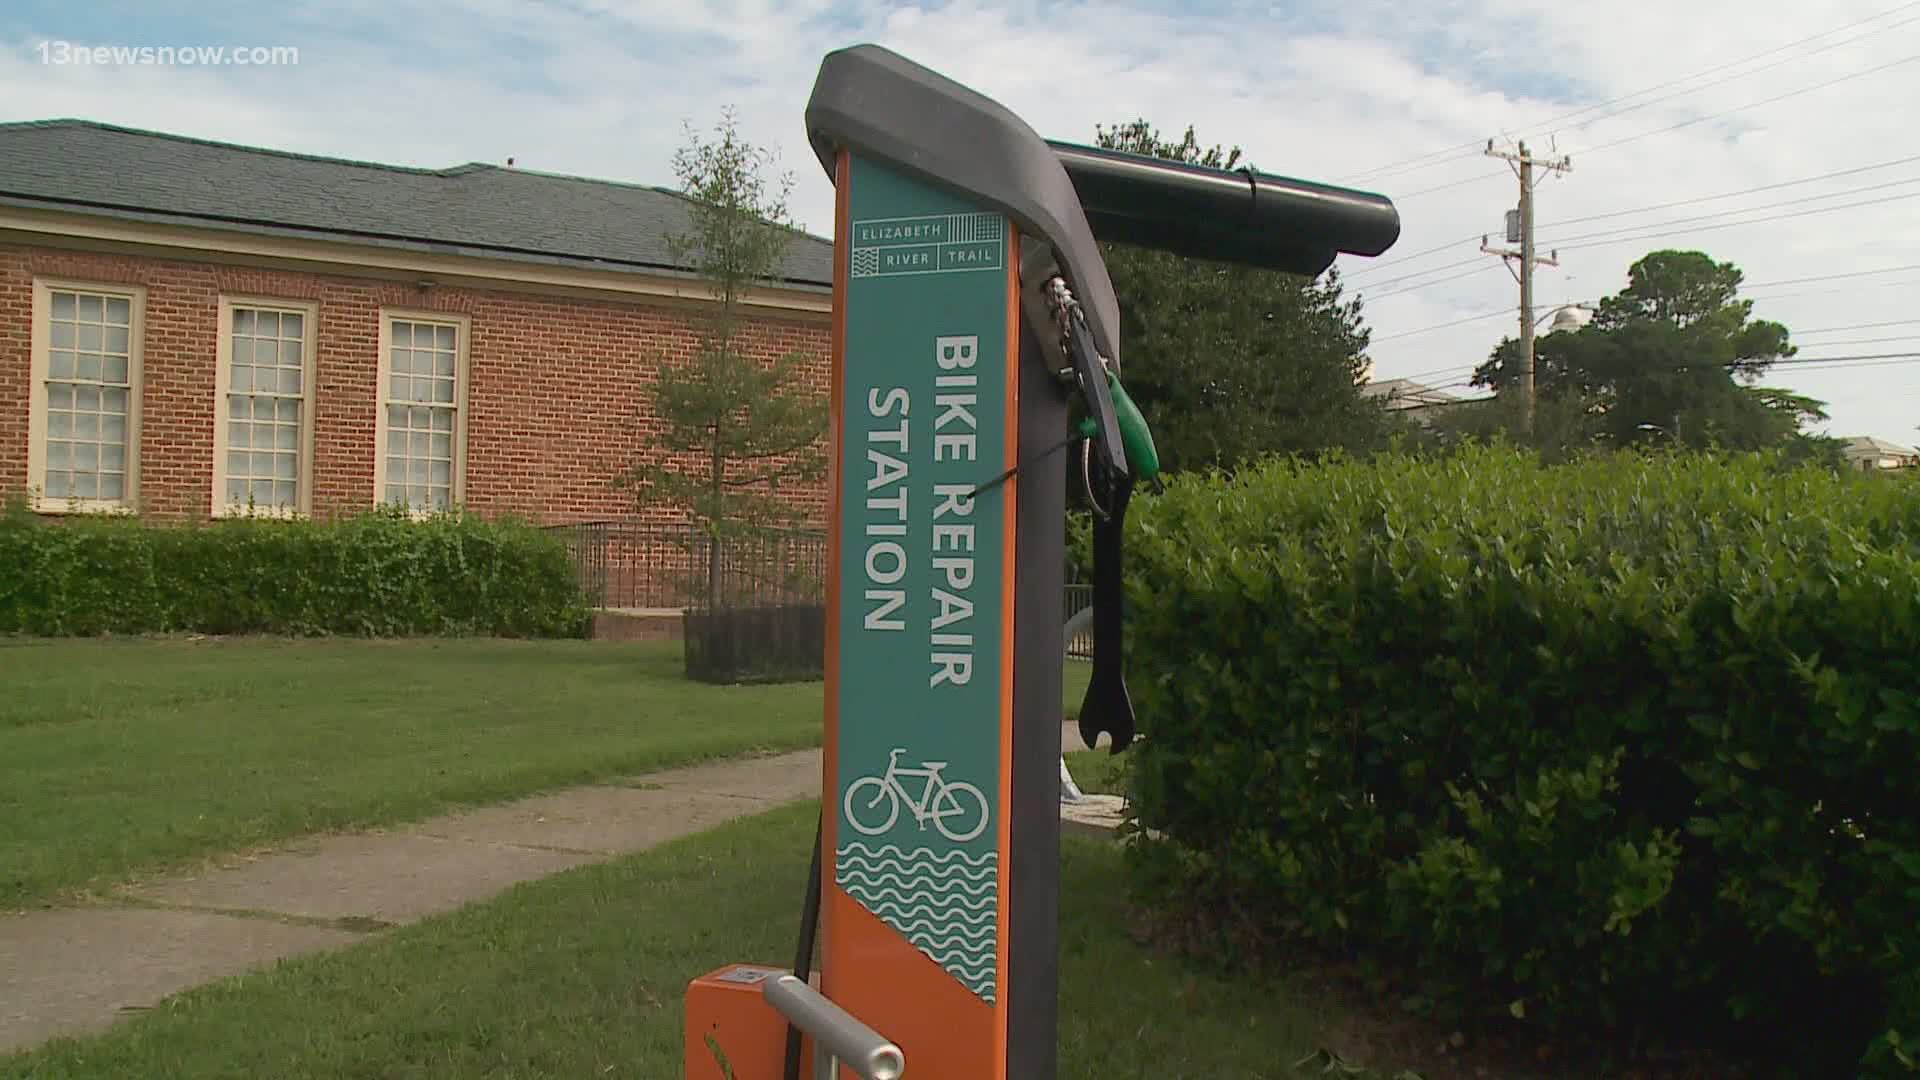 Biking on the Elizabeth River Trail is about to be as risk-free as ever, with new amenities like bike racks, air pumps and repair stations.